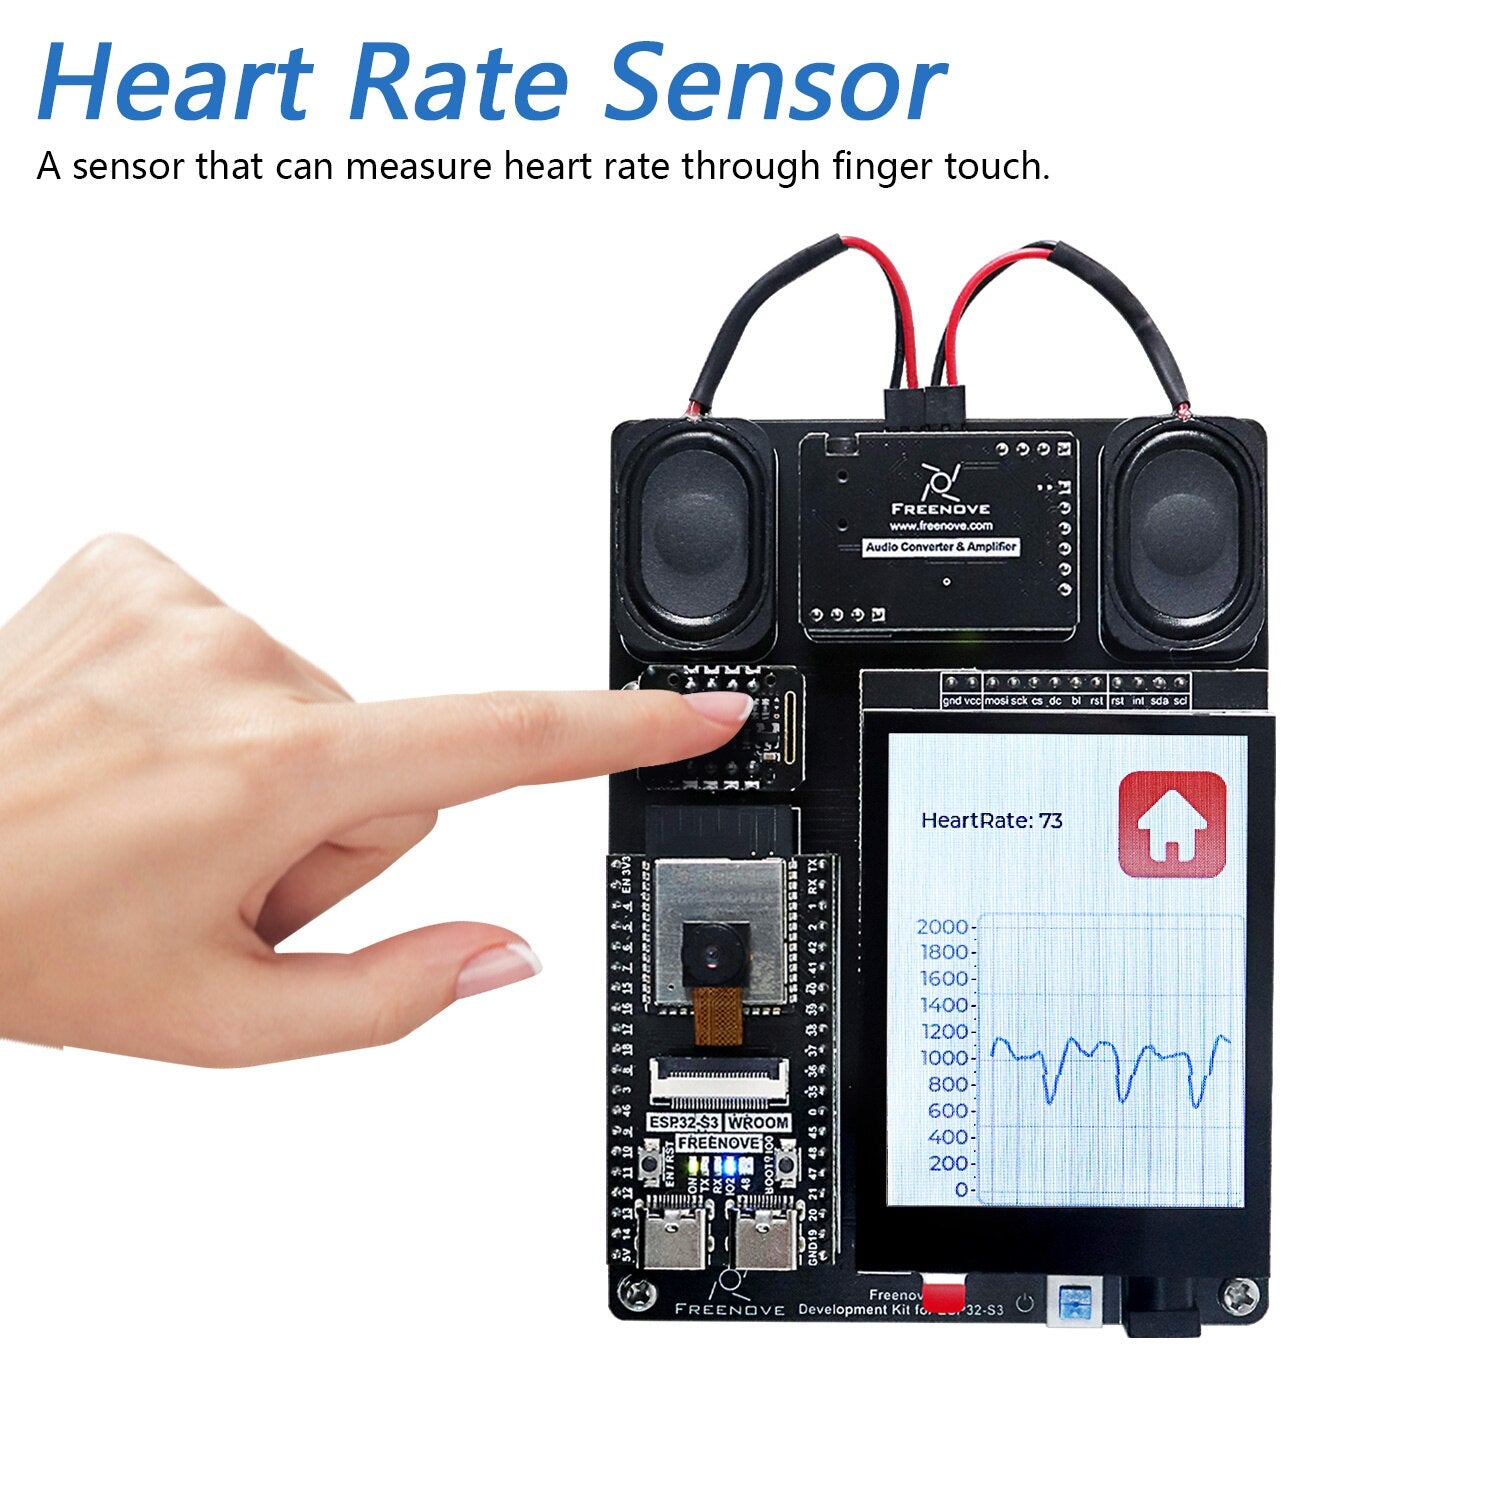 Heart Rate Sensor a sensor that can measure heart rate through finger touch: FRCENO